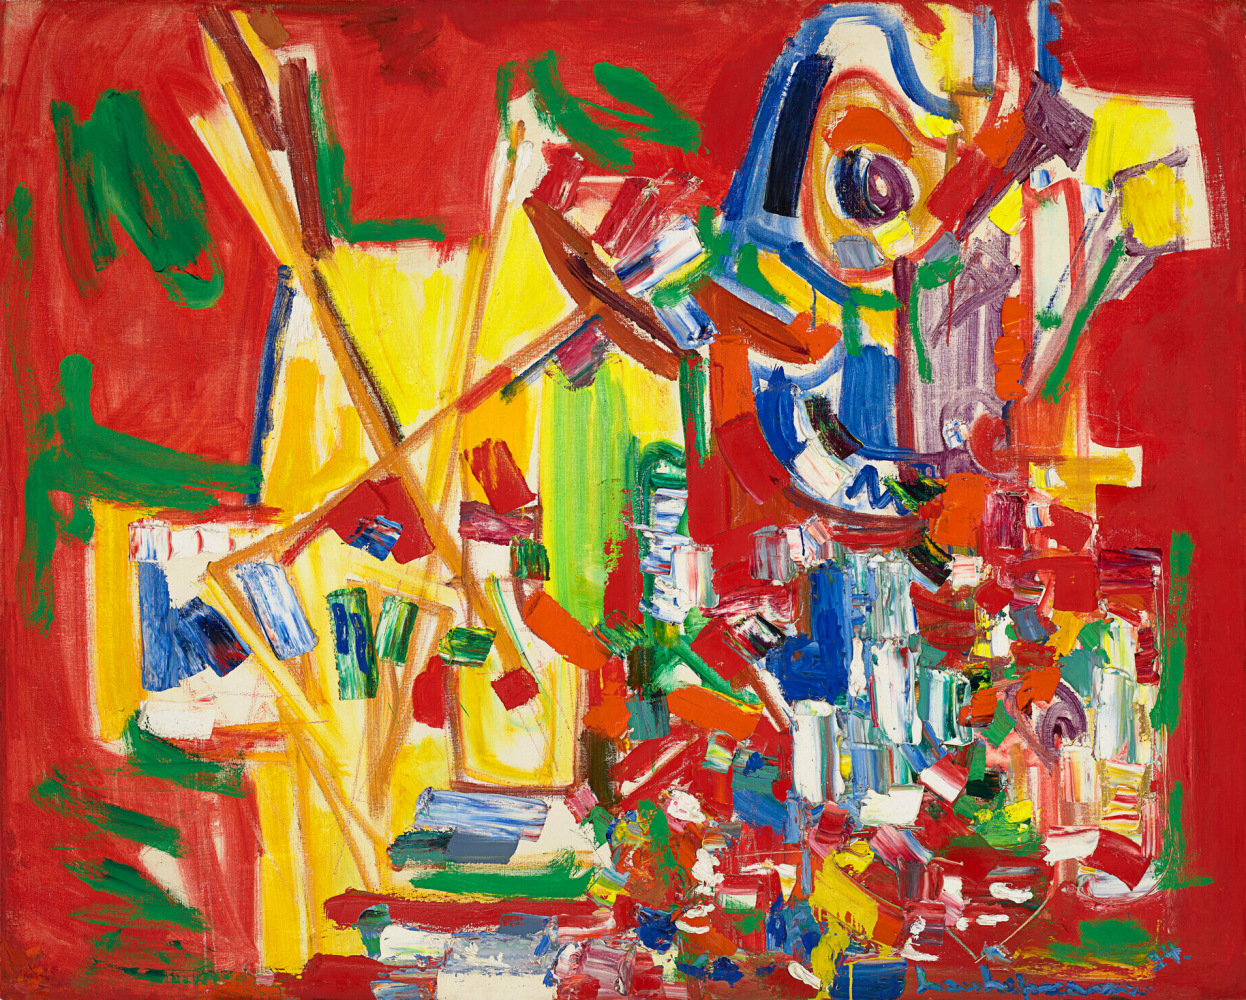 Orchestral Dominance in Red

1954

Oil on canvas

48 x 60 inches

121.9 x 152.4cm